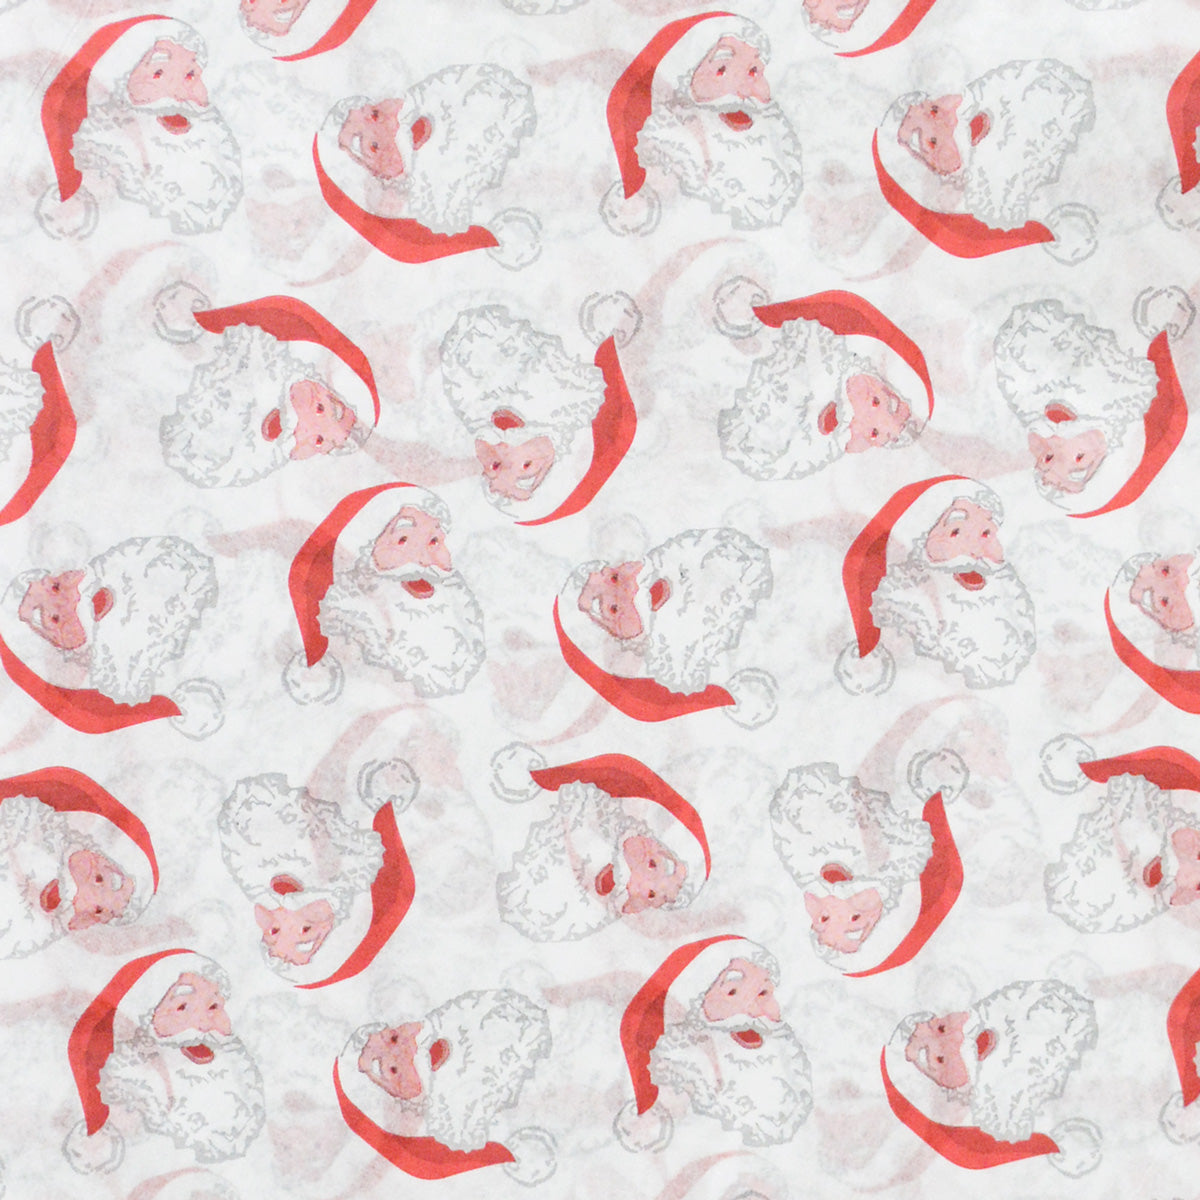 Happy Santa Claus Tissue Paper - Christmas Santa Claus Theme Gift Wrapping & Winter Party Favor Bags & Holiday Handcraft Supplies